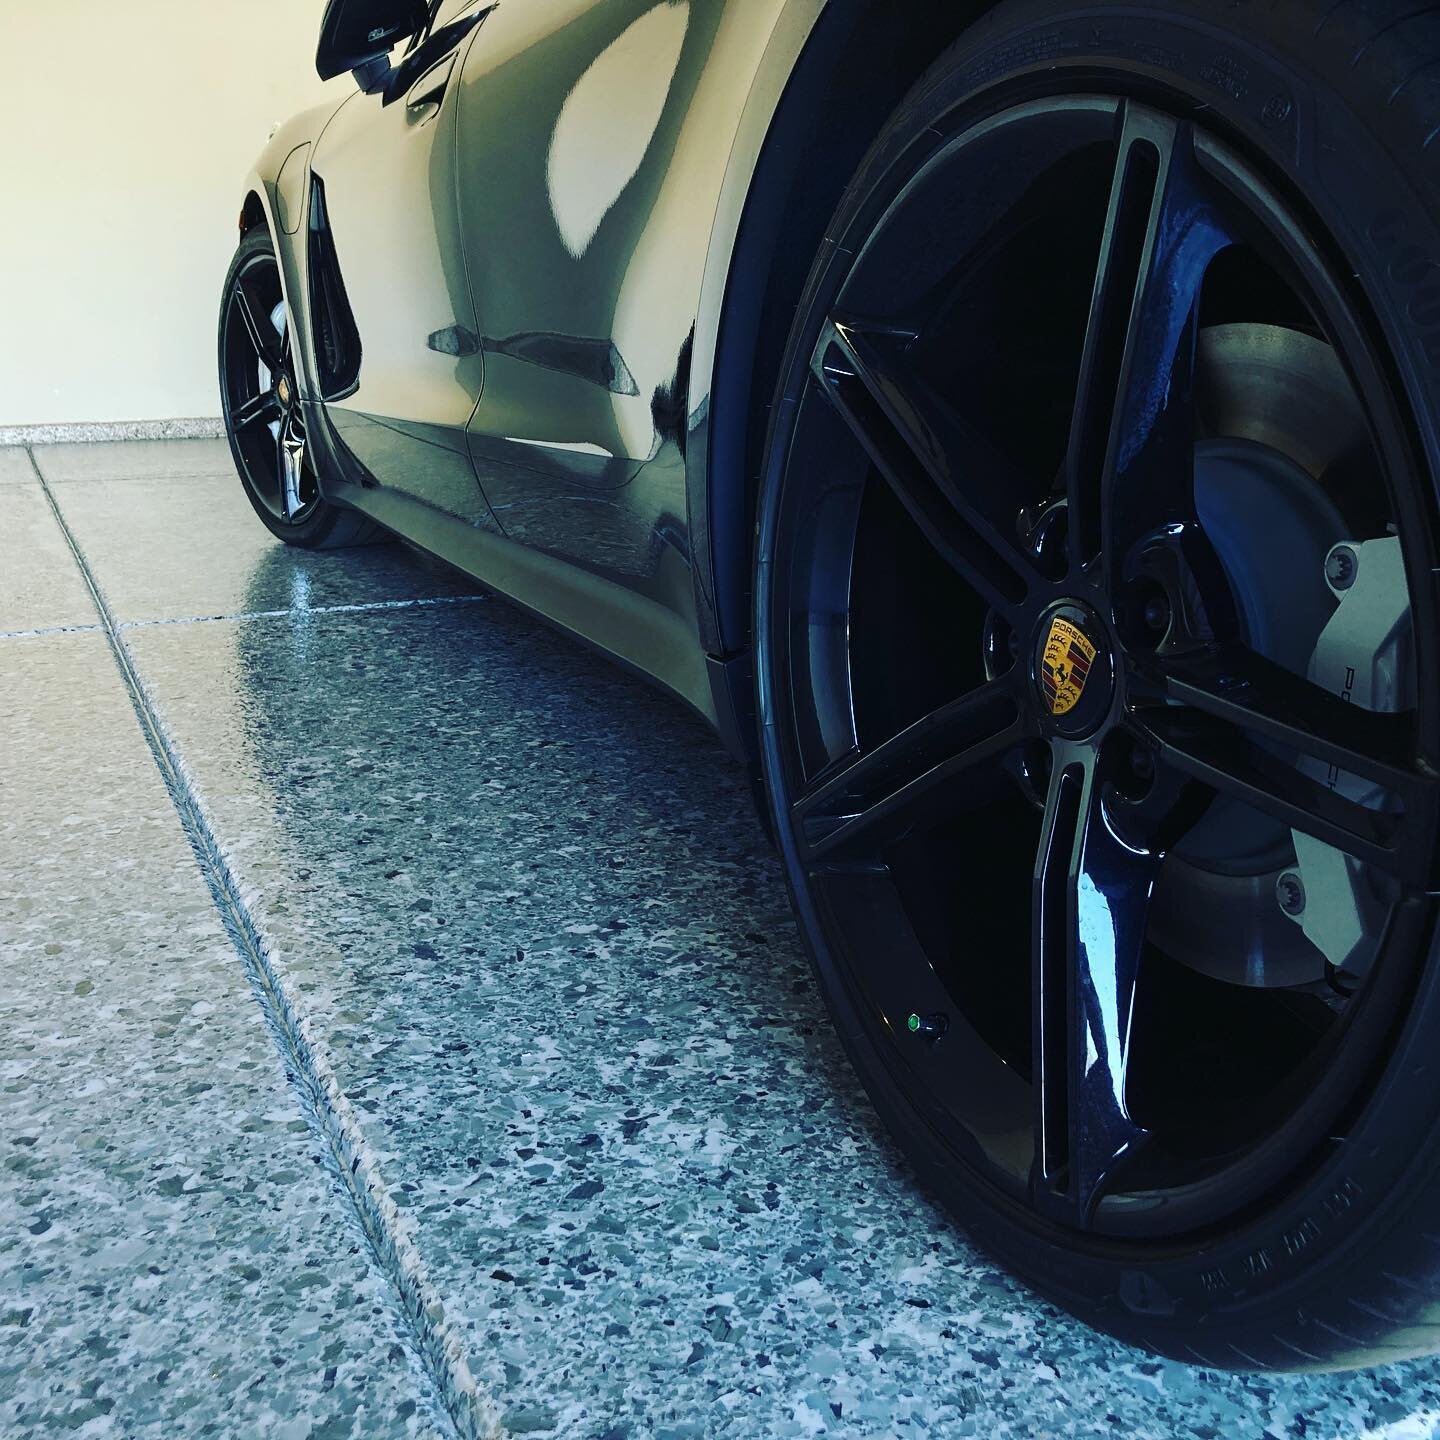 FACT: New cars love new floors! 
💪 A car this powerful deserves to be parked on floors that are just as strong!
👀 Our Brindle Epoxy System is clean, durable and almost as good looking as this car! 
🏡We were happy to create the perfect new home for